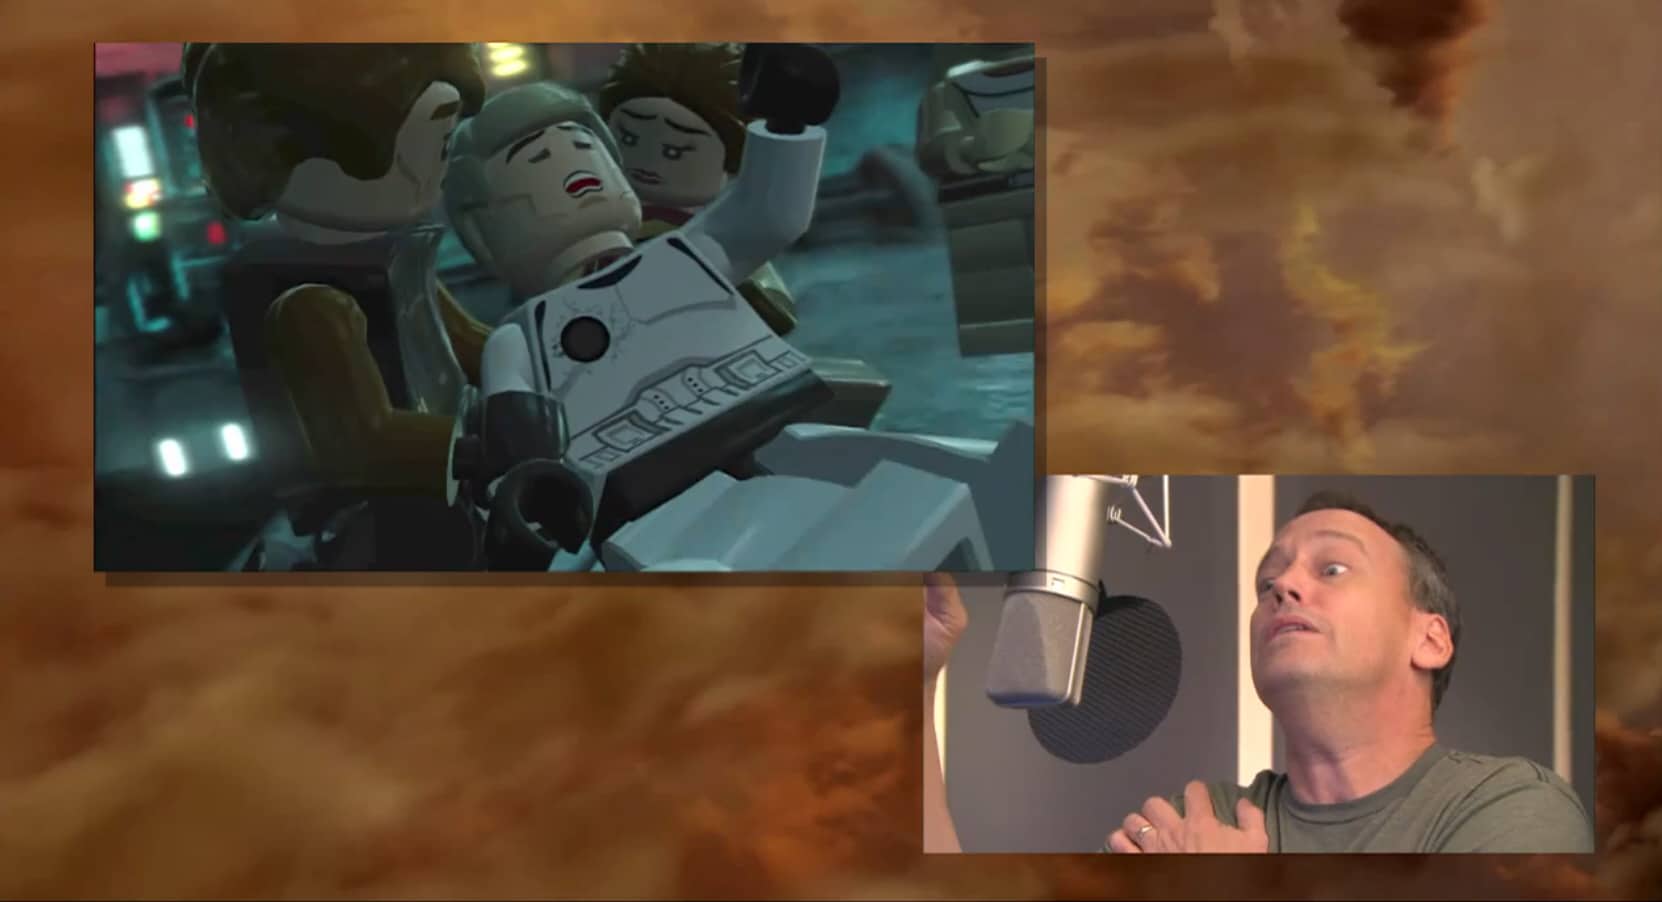 Lego Star Wars 3 voice actors show to talk as Lego People - Video Games Blogger